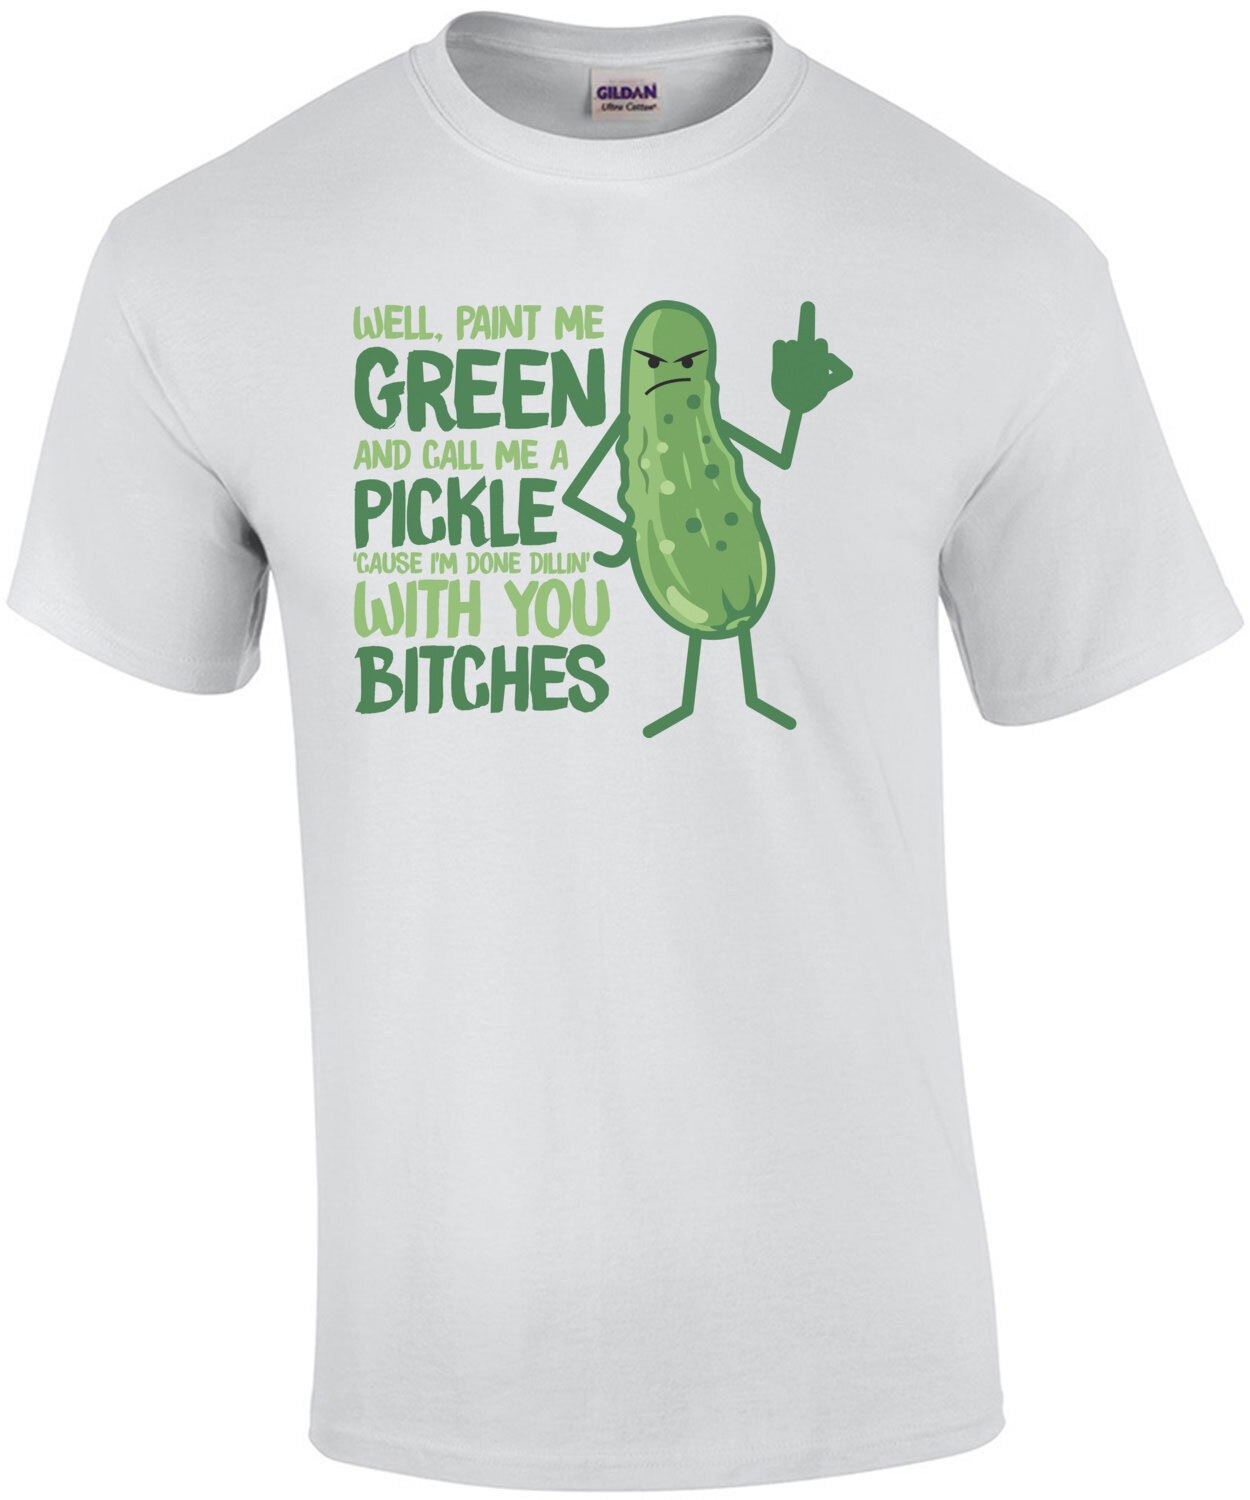 Well, paint me green and call me a pickle 'cause I'm done dillin' with you bitches - funny insult t-shirt